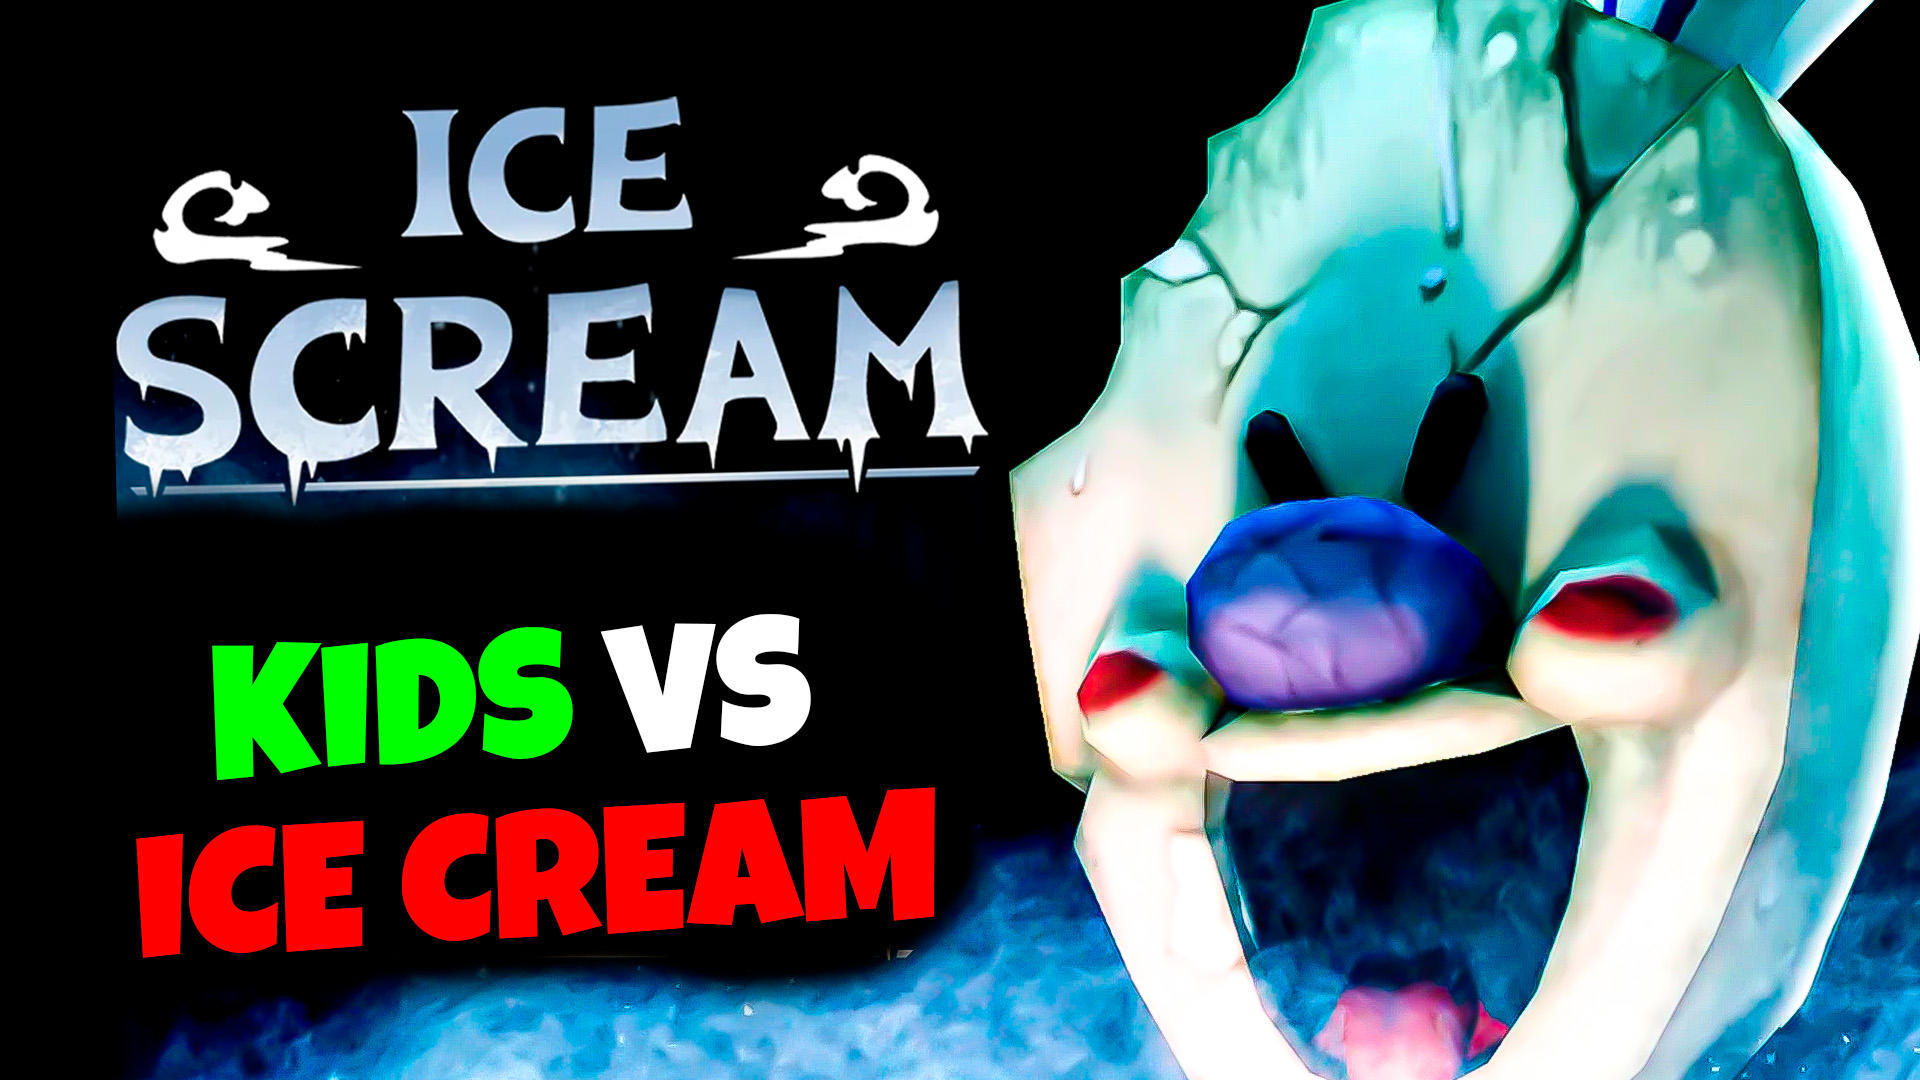 Ice Scream United APK for Android Download